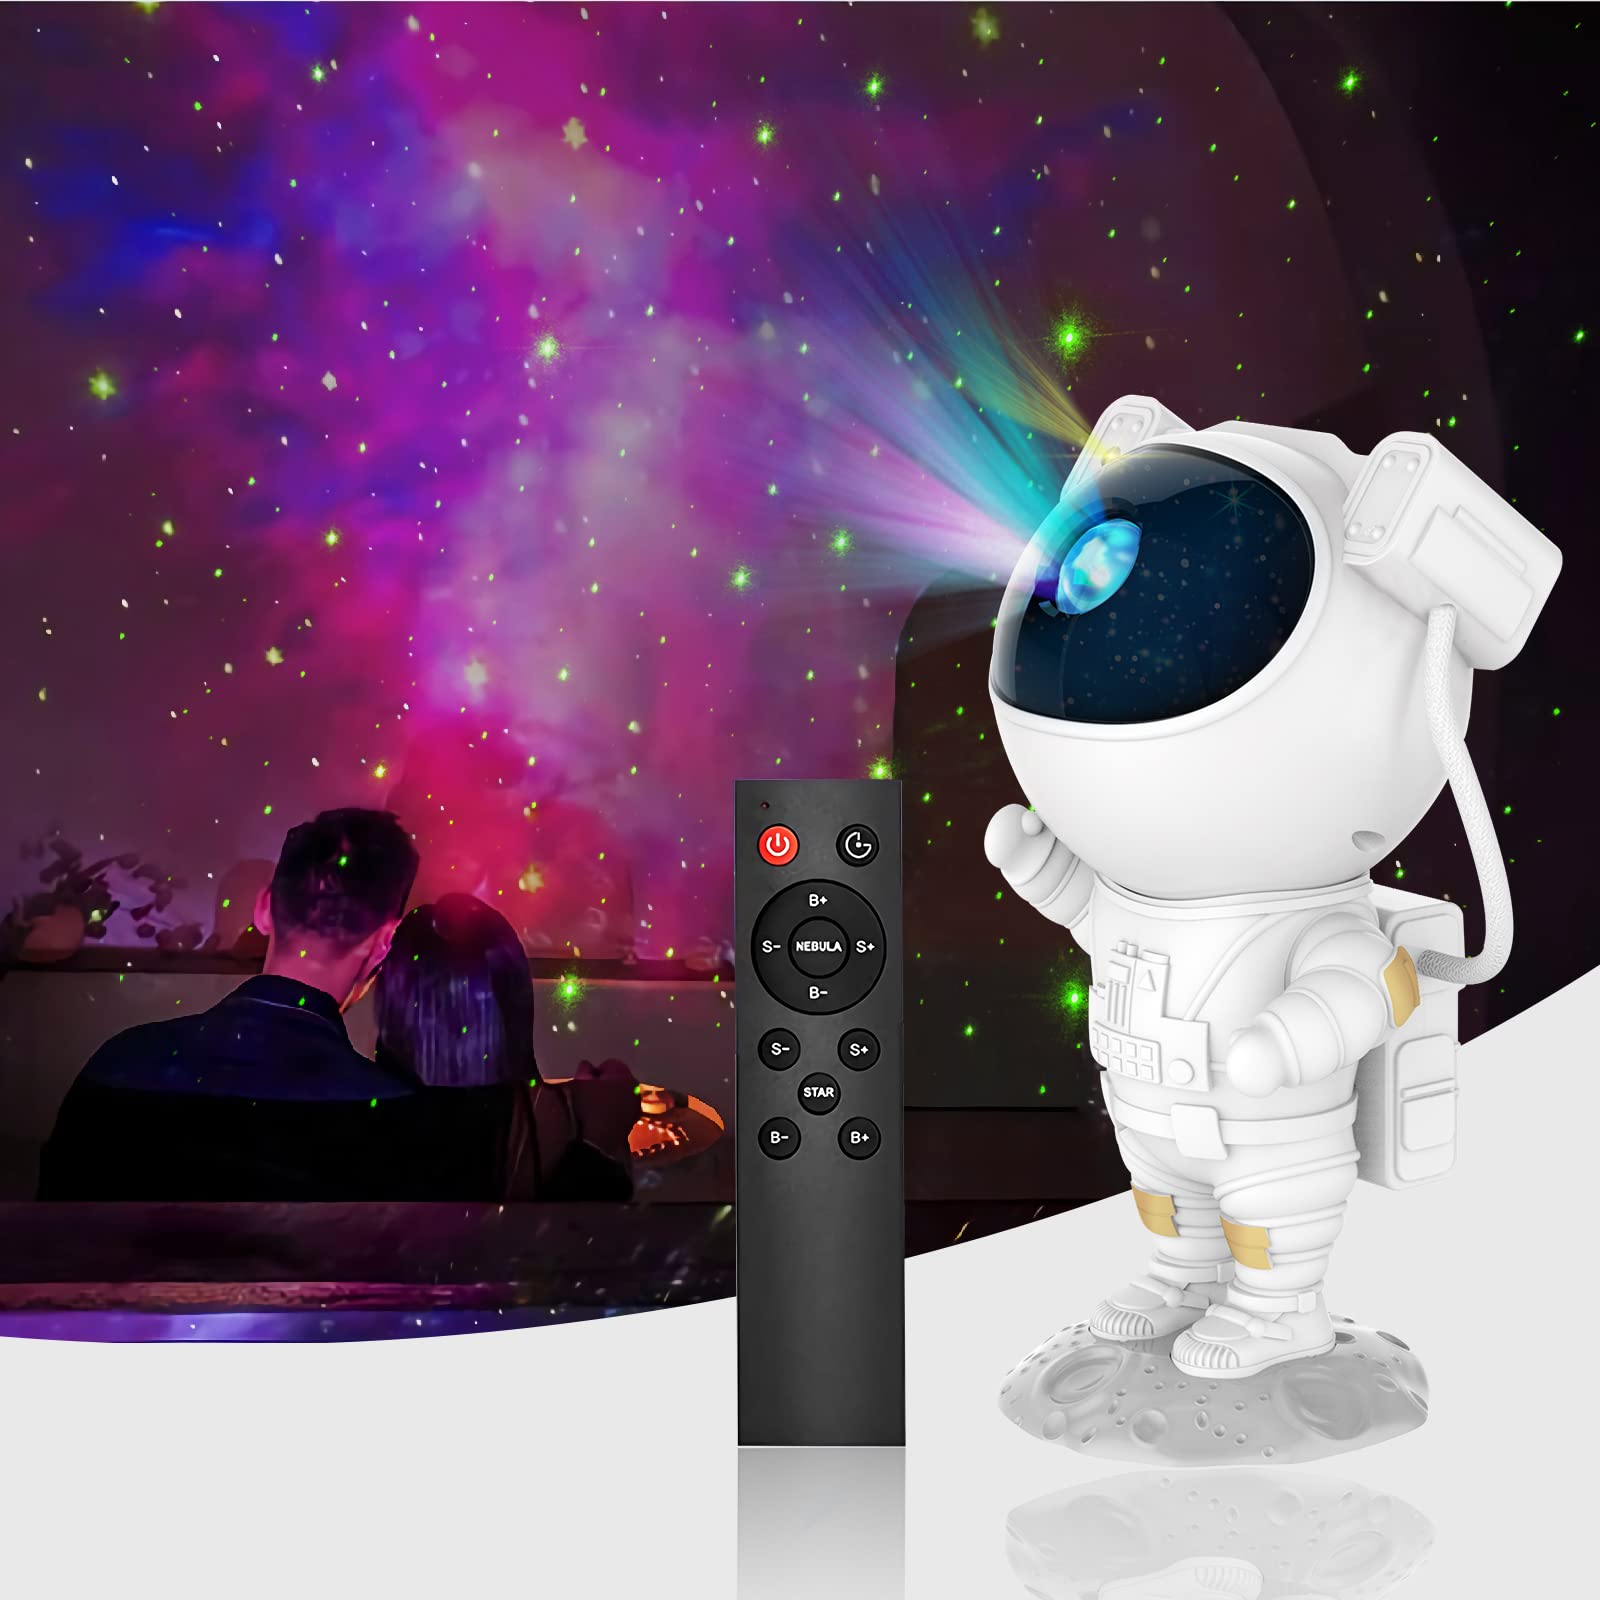 Astronaut Galaxy Star Projector Starry Night Light, Astronaut Light Projector with Nebula,Timer and Remote Control, Bedroom and Ceiling Projector, Best Gifts for Children and Adults